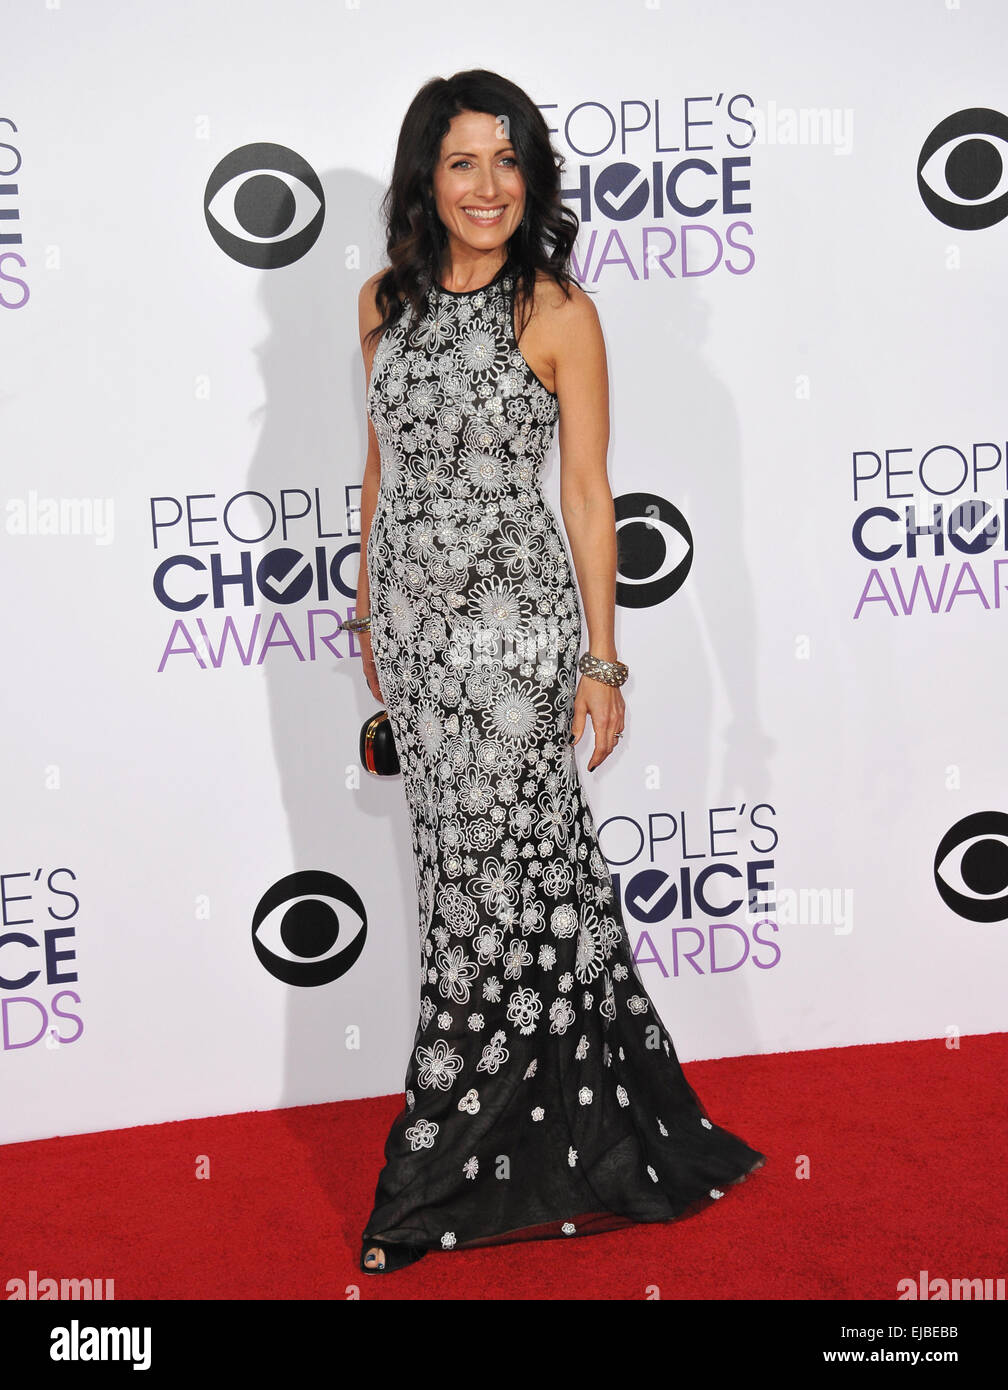 LOS ANGELES, CA - JANUARY 7, 2015: Lisa Edelstein at the 2015 People's Choice Awards at the Nokia Theatre L.A. Live downtown Los Angeles. Stock Photo